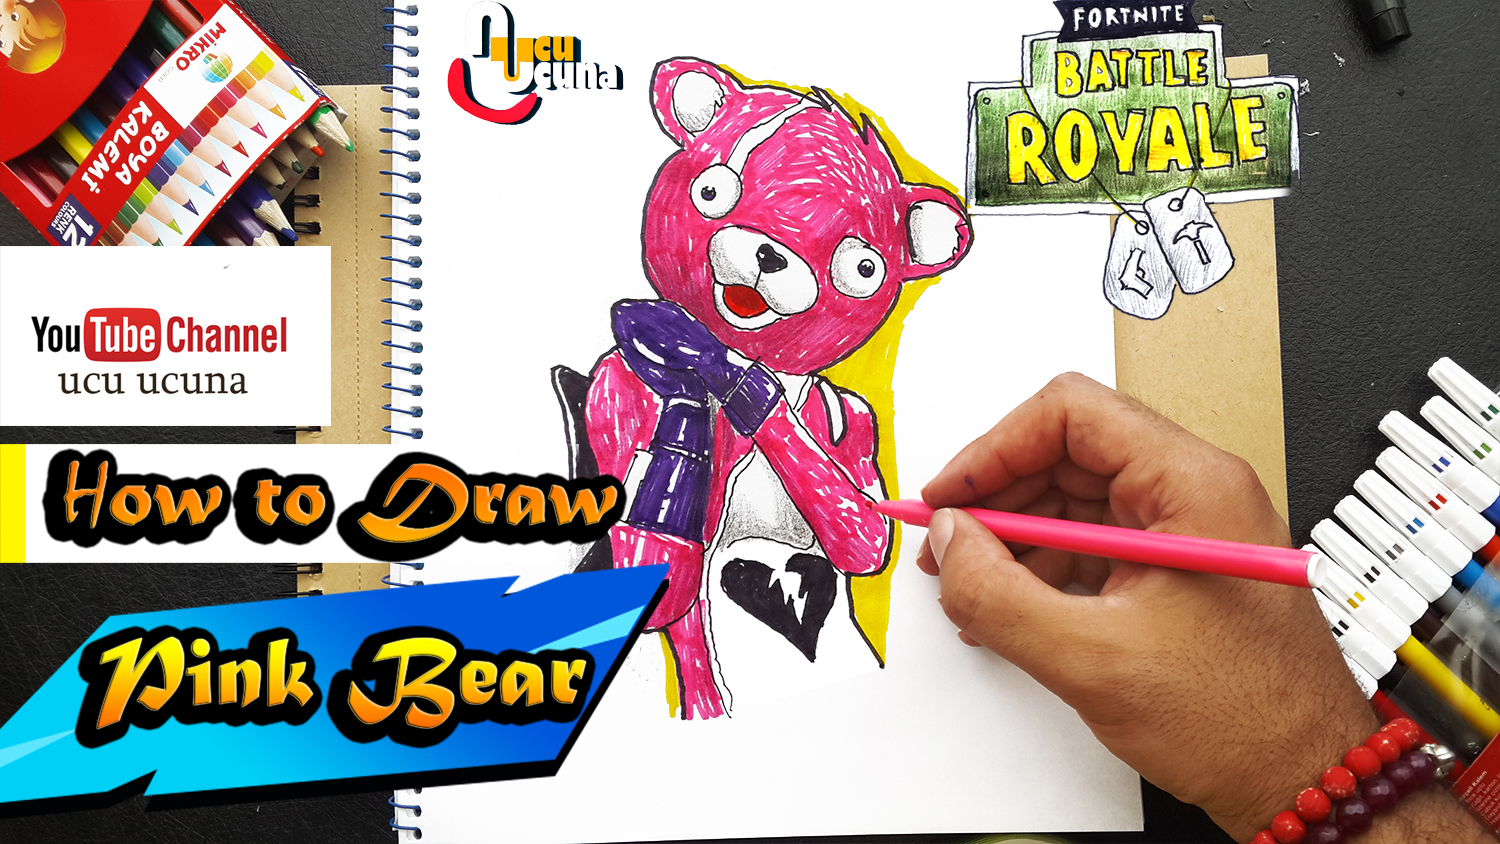 How to draw pink bear fortnite tutorial youtube channel name is ucu ucuna learn how to draw pink bear from fortnite step by step beginner drawing tutorial of the pink bear skin from fortnite